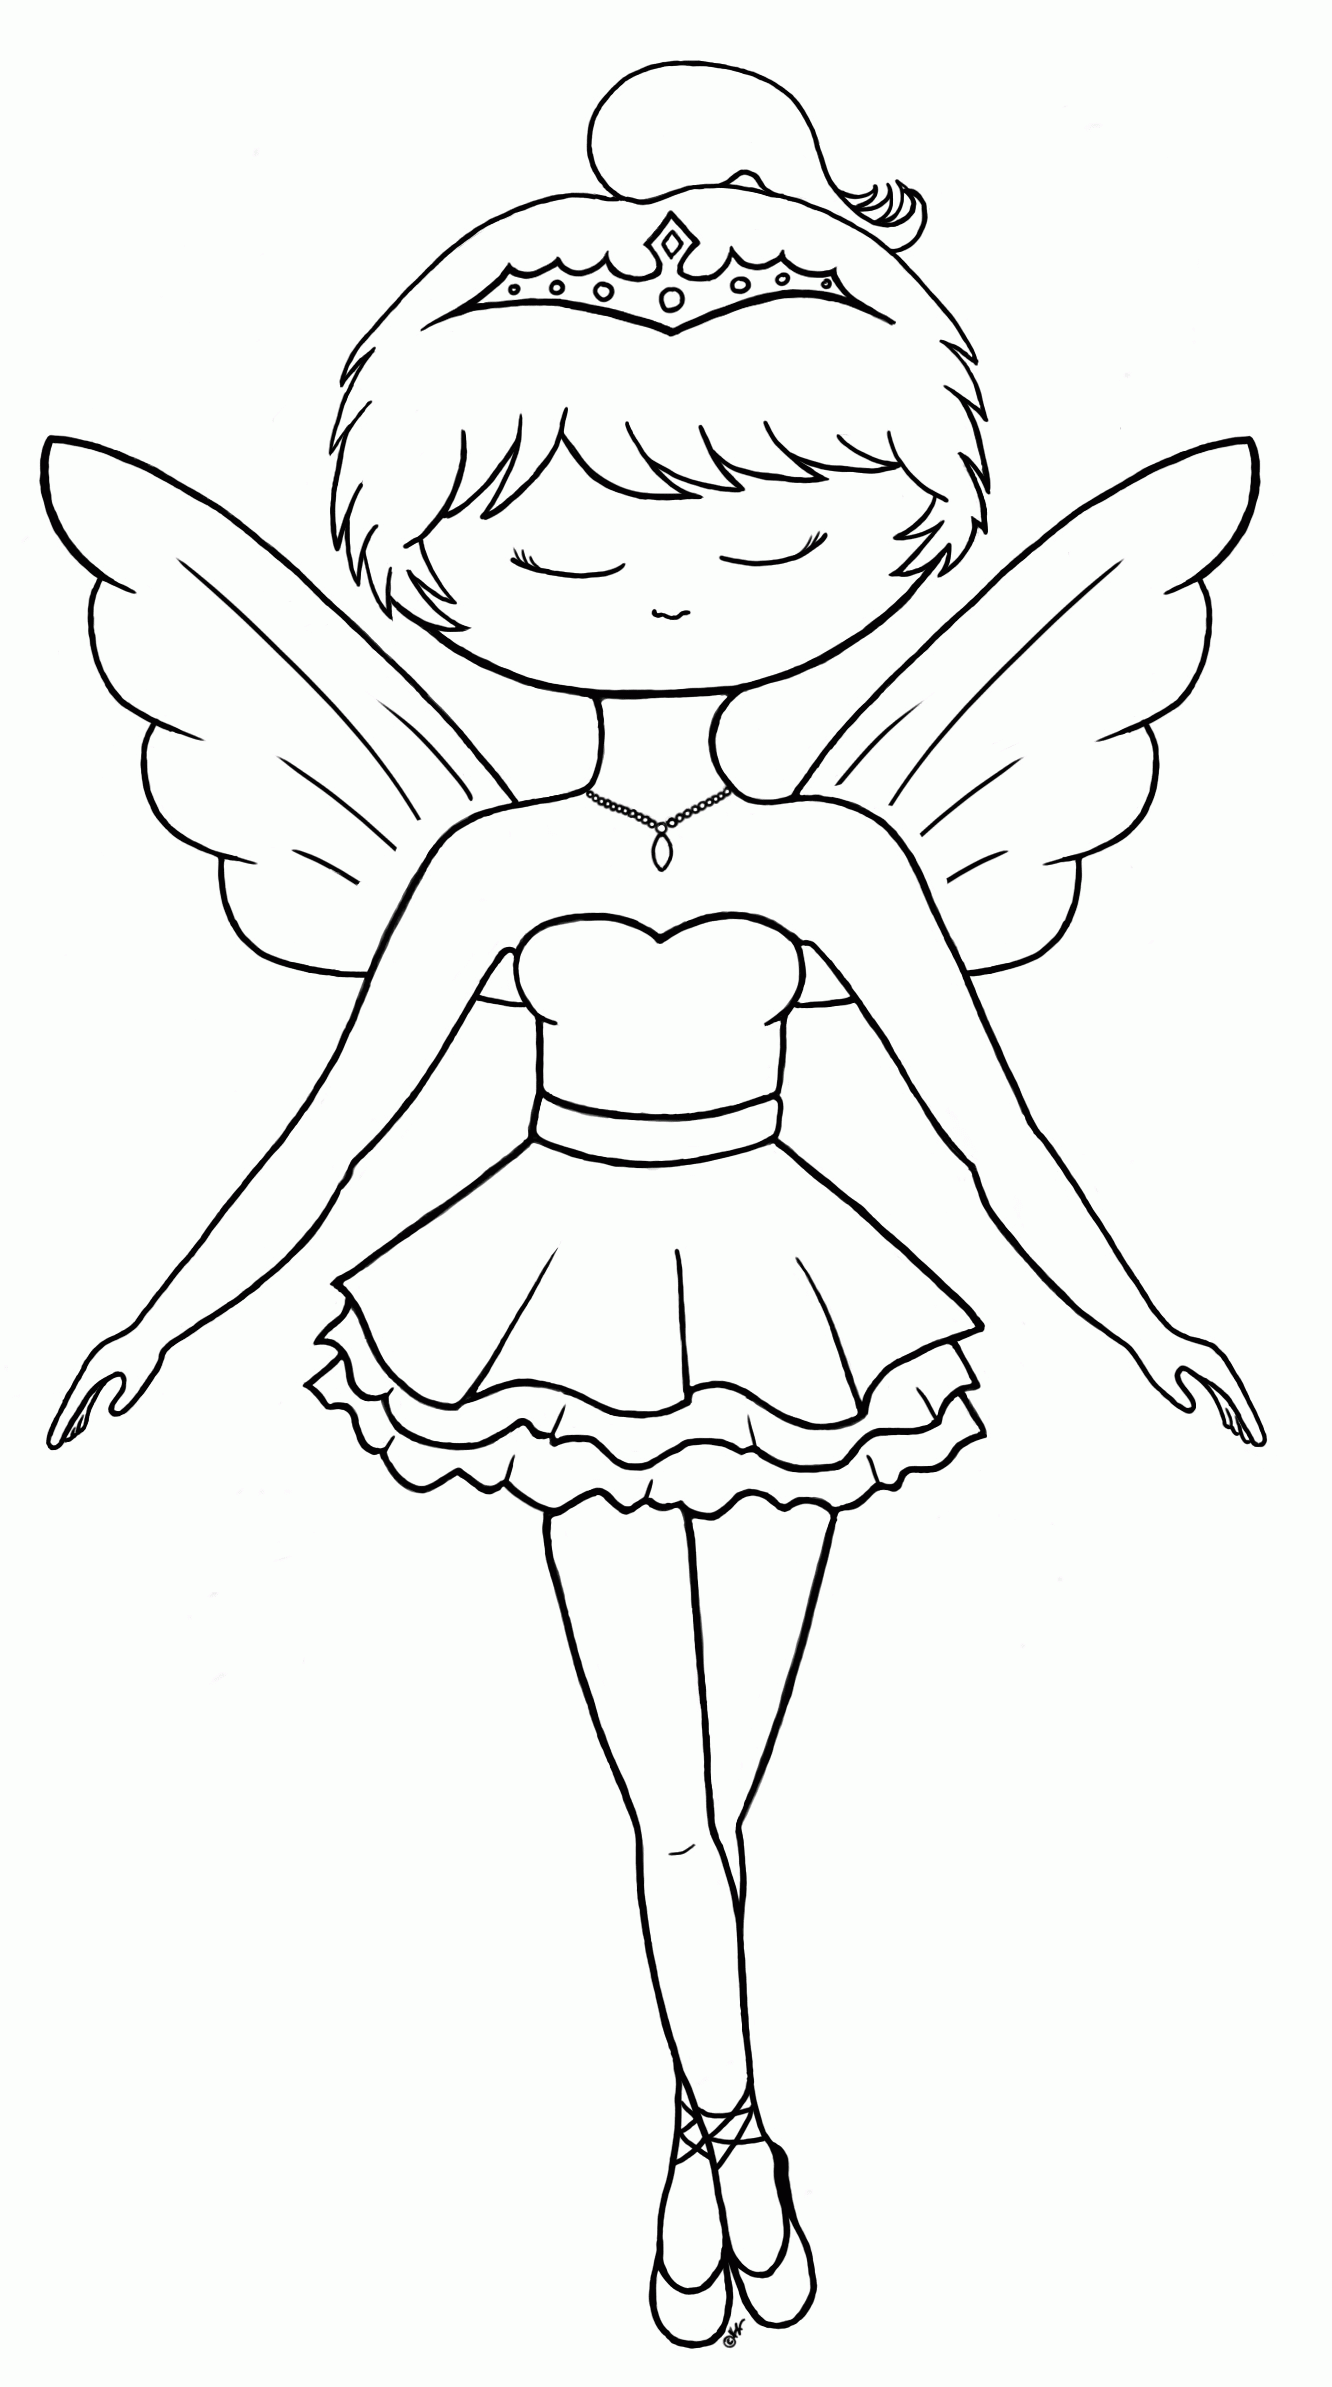 Ballerina Coloring Pages for childrens printable for free